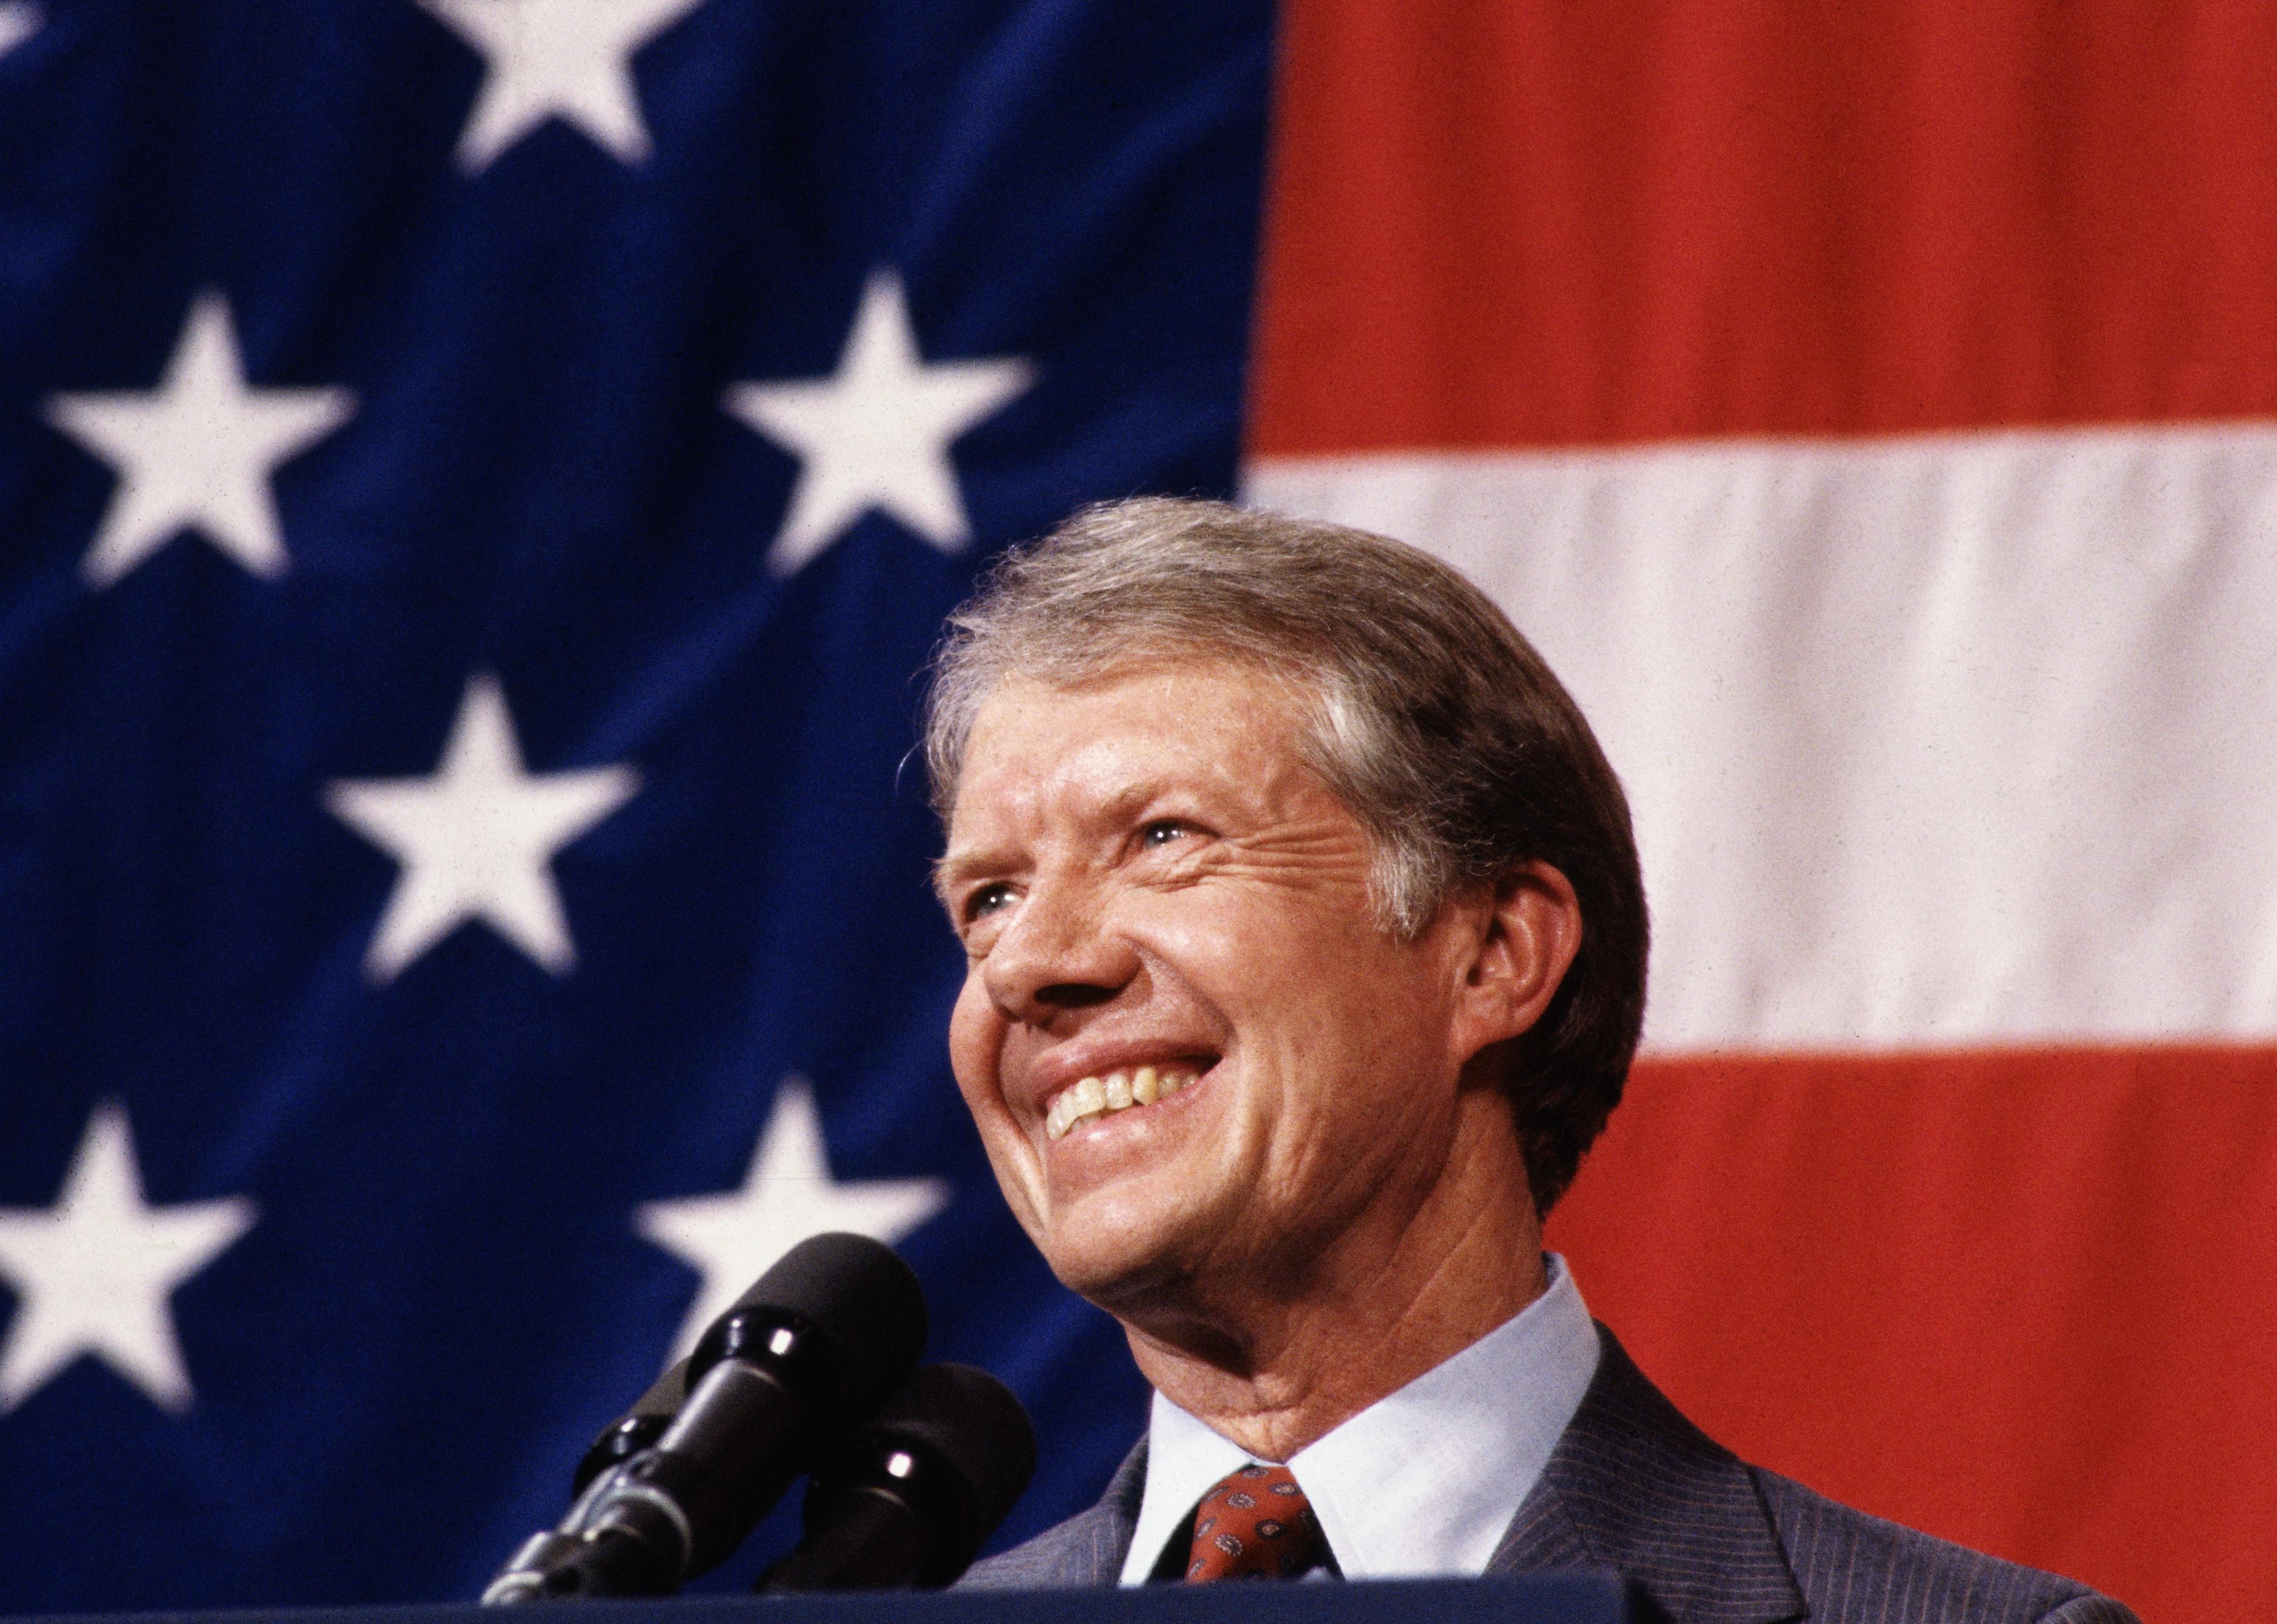 Jimmy Carter smiling at a podium in front of an American flag.